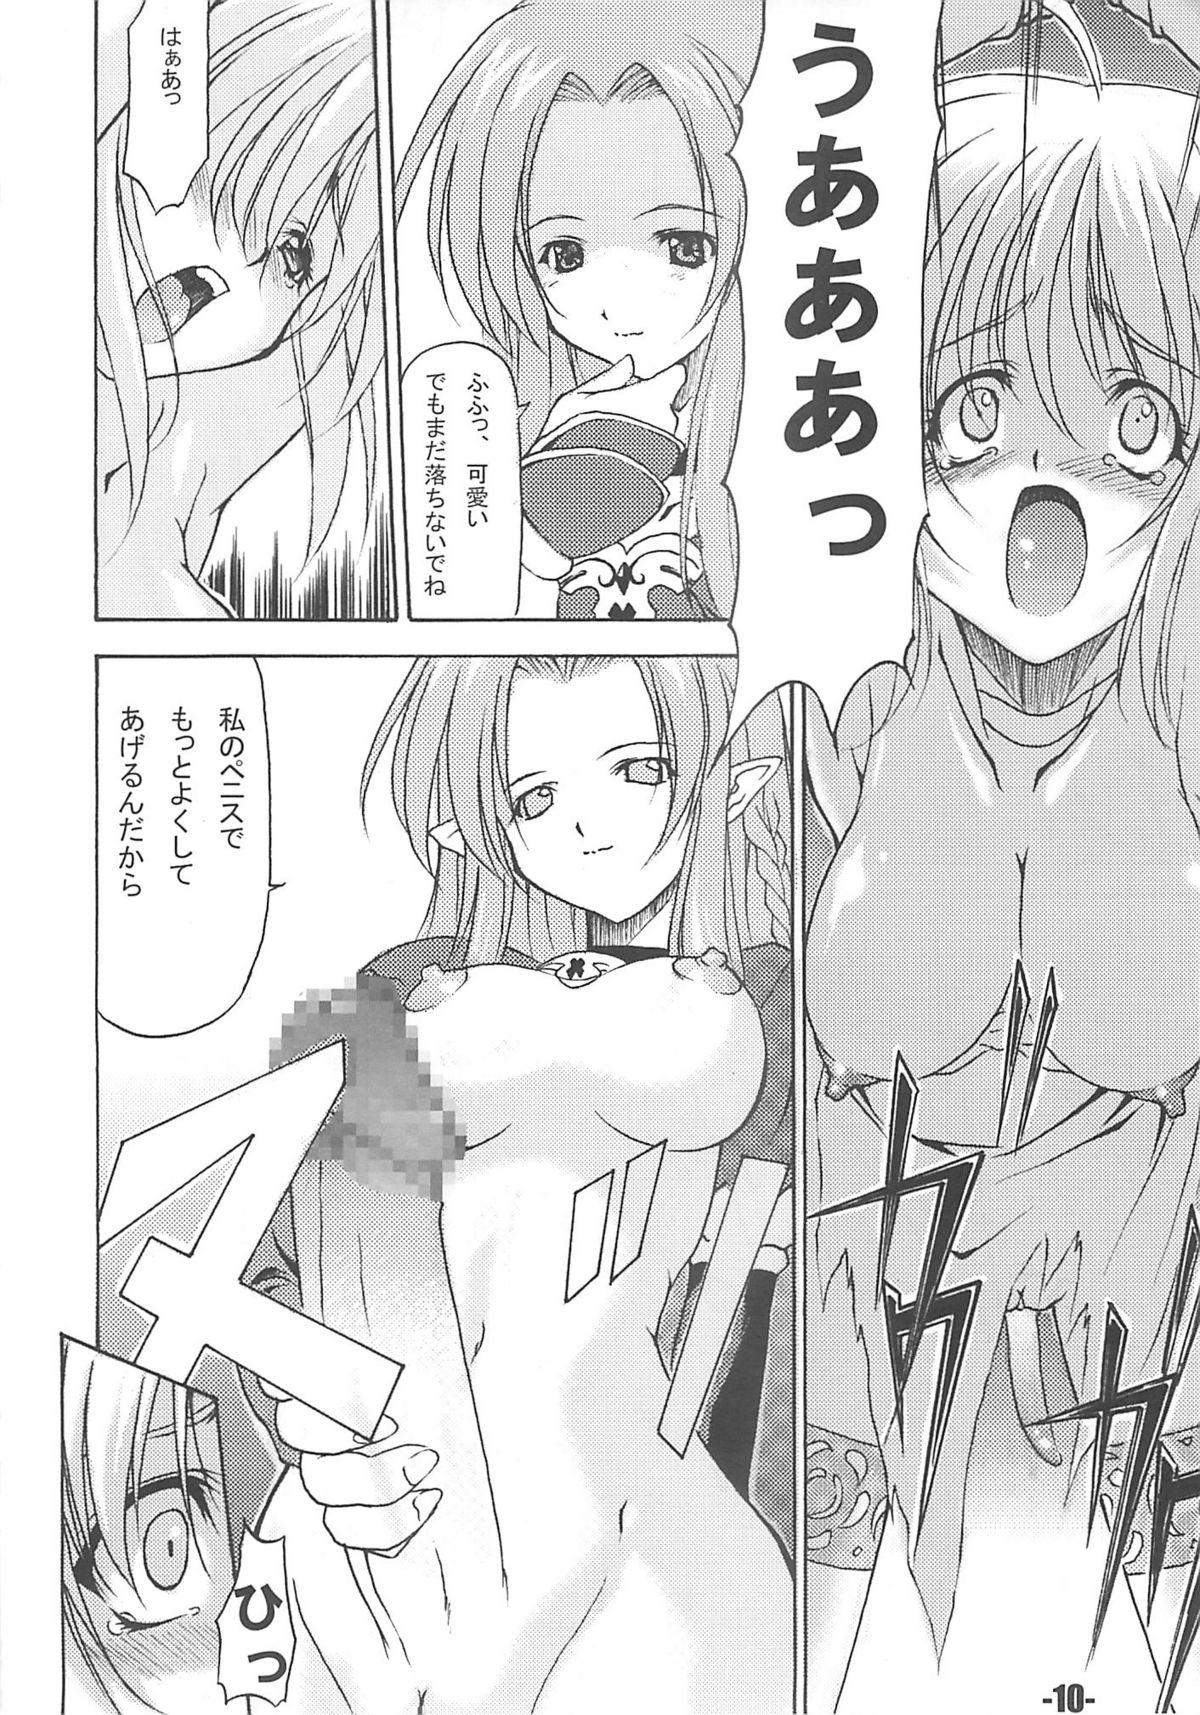 Mulata EXtra stage vol. 13 - Fate stay night Indonesia - Page 9